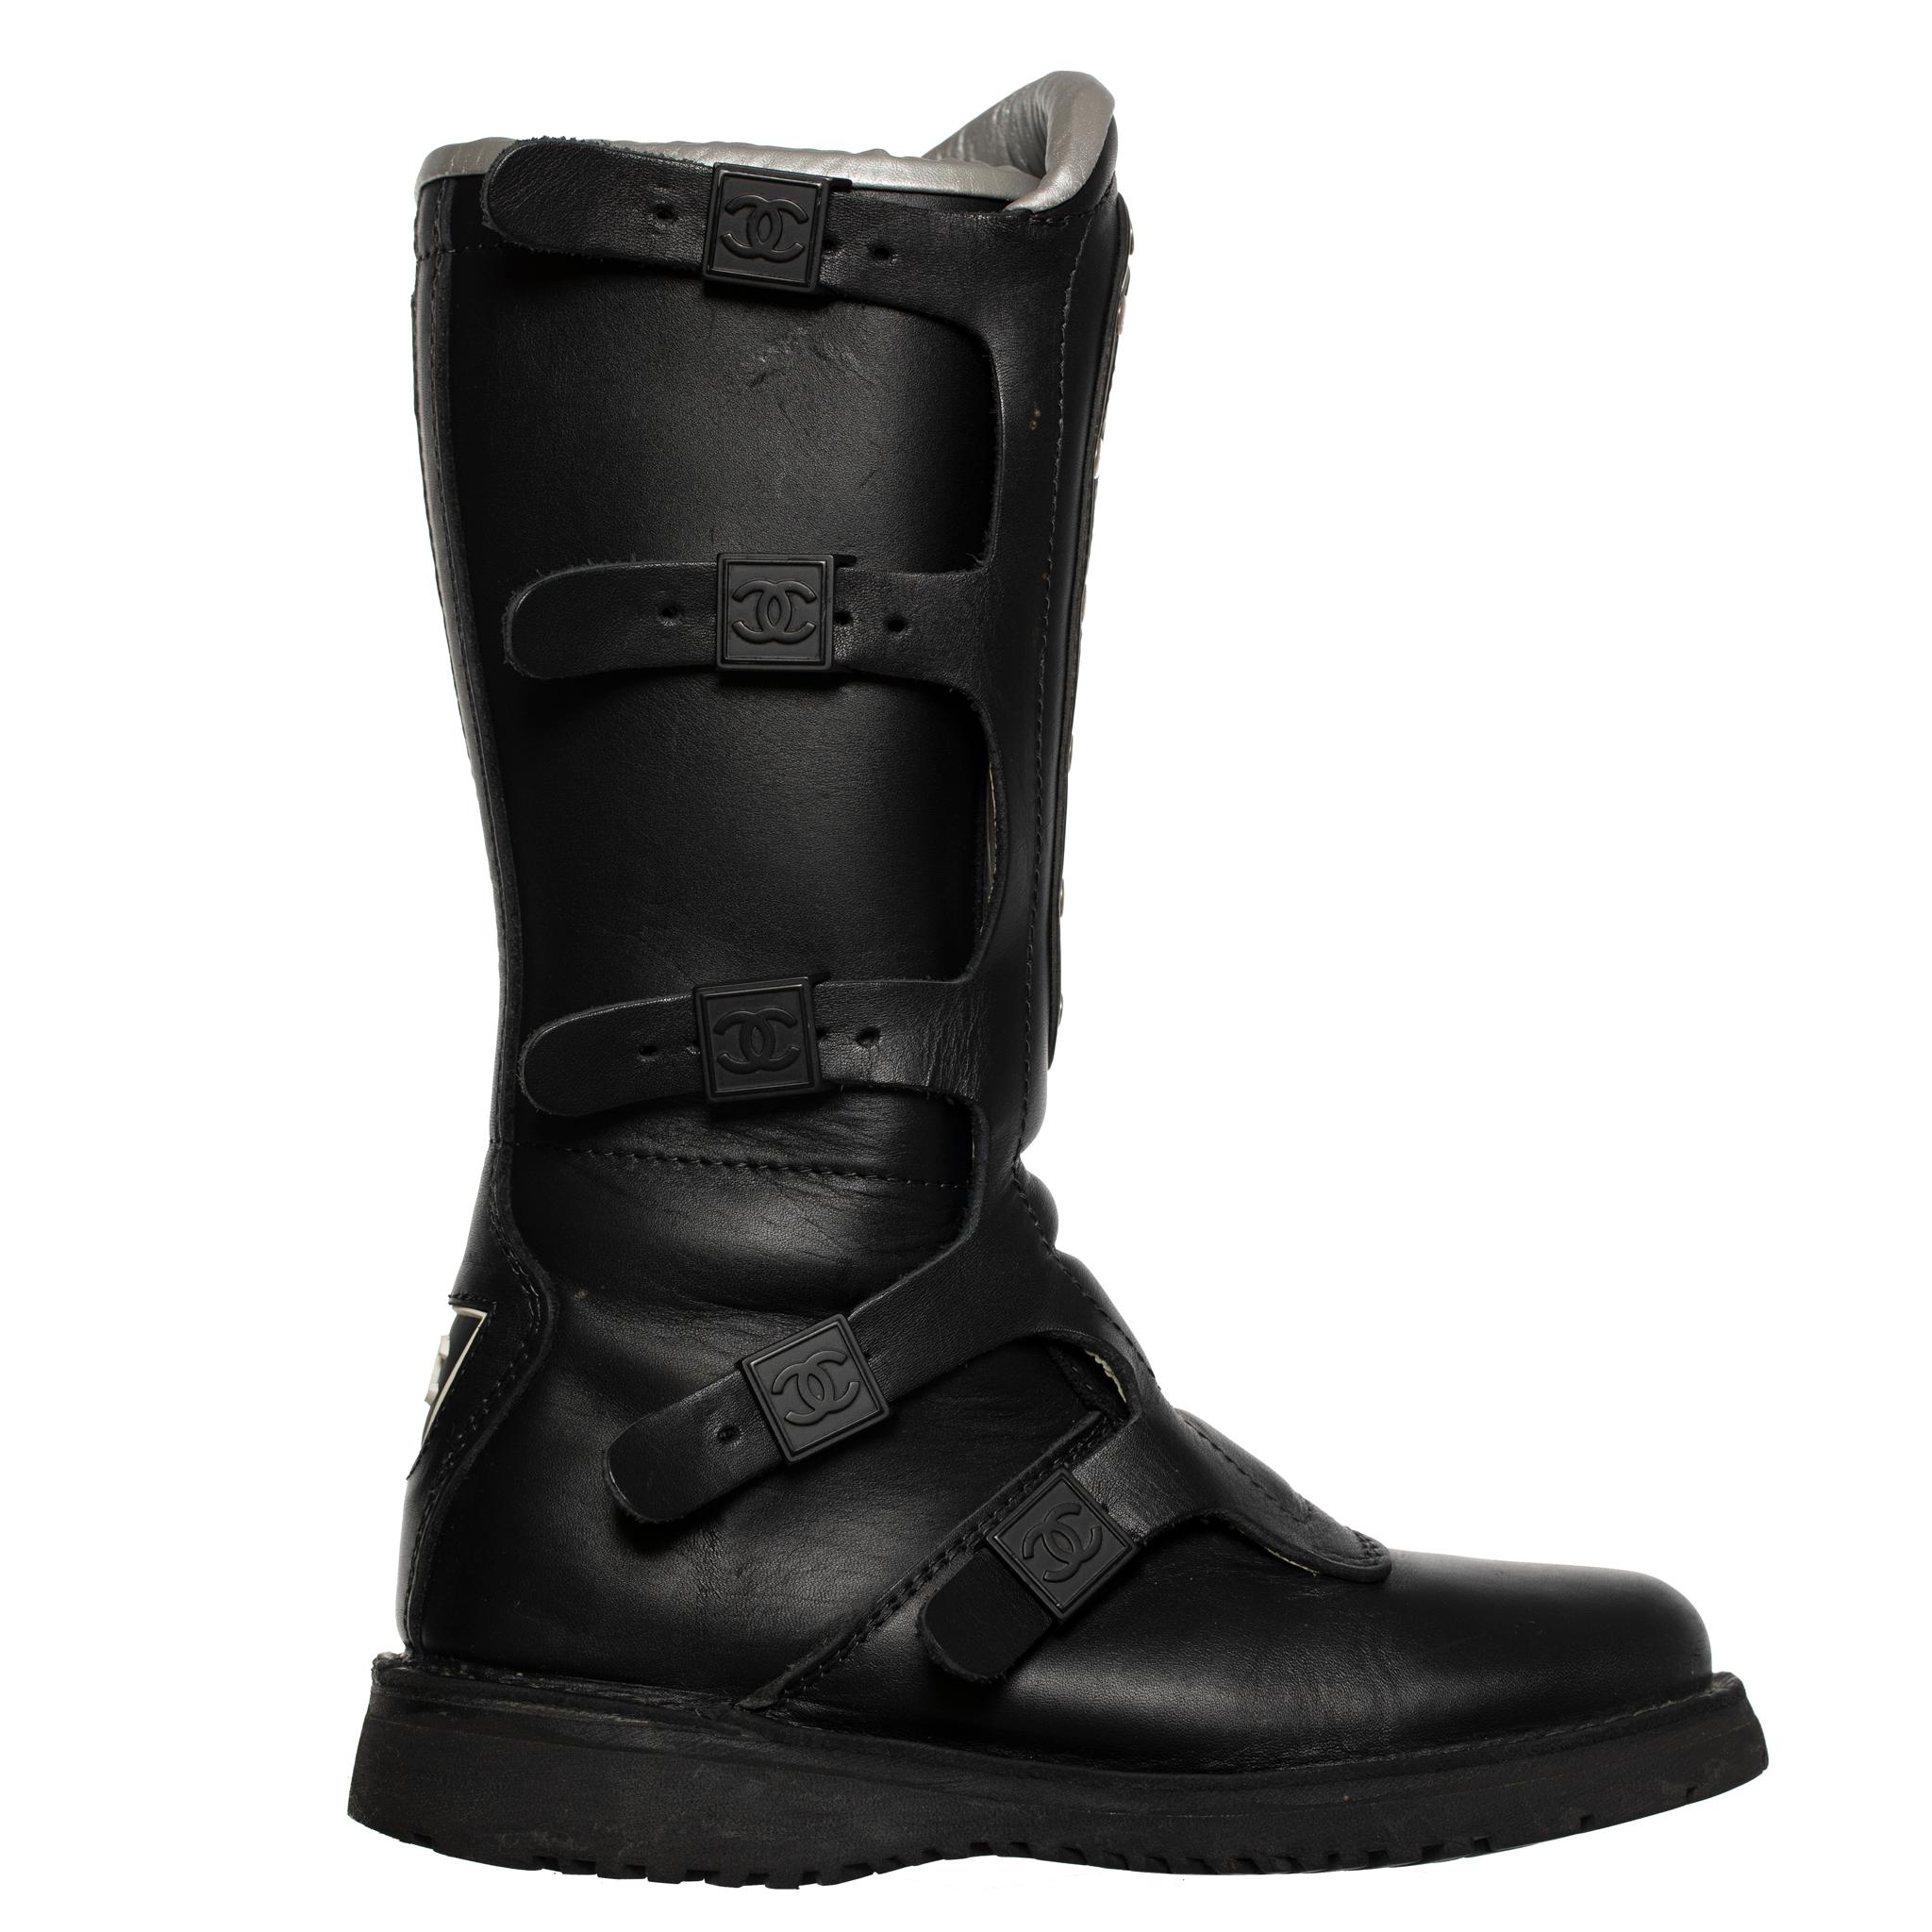 Chanel Winter Ski Boots Black

Brand:

Chanel

Product:

Winter Ski Boots

Size:

39 Fr

Colour:

Black, White & Silver

Material:

Leather

Condition:

Preloved; Very Good

Accompanied By:

Boots Only

This item is consistent with wear and retails